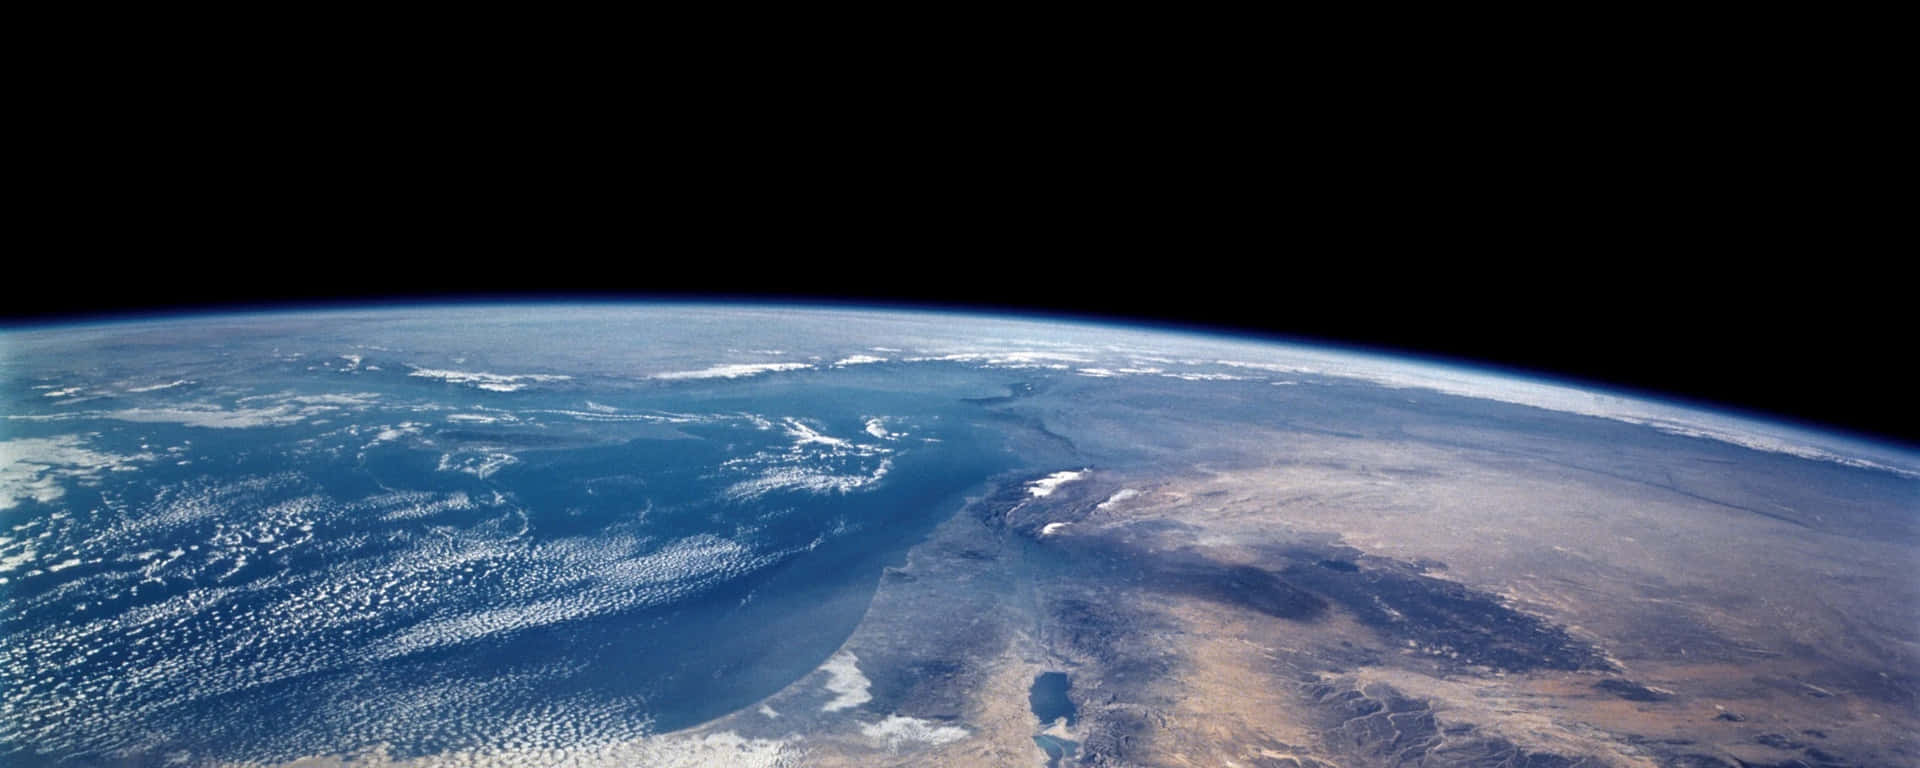 A View Of The Earth From Space Wallpaper